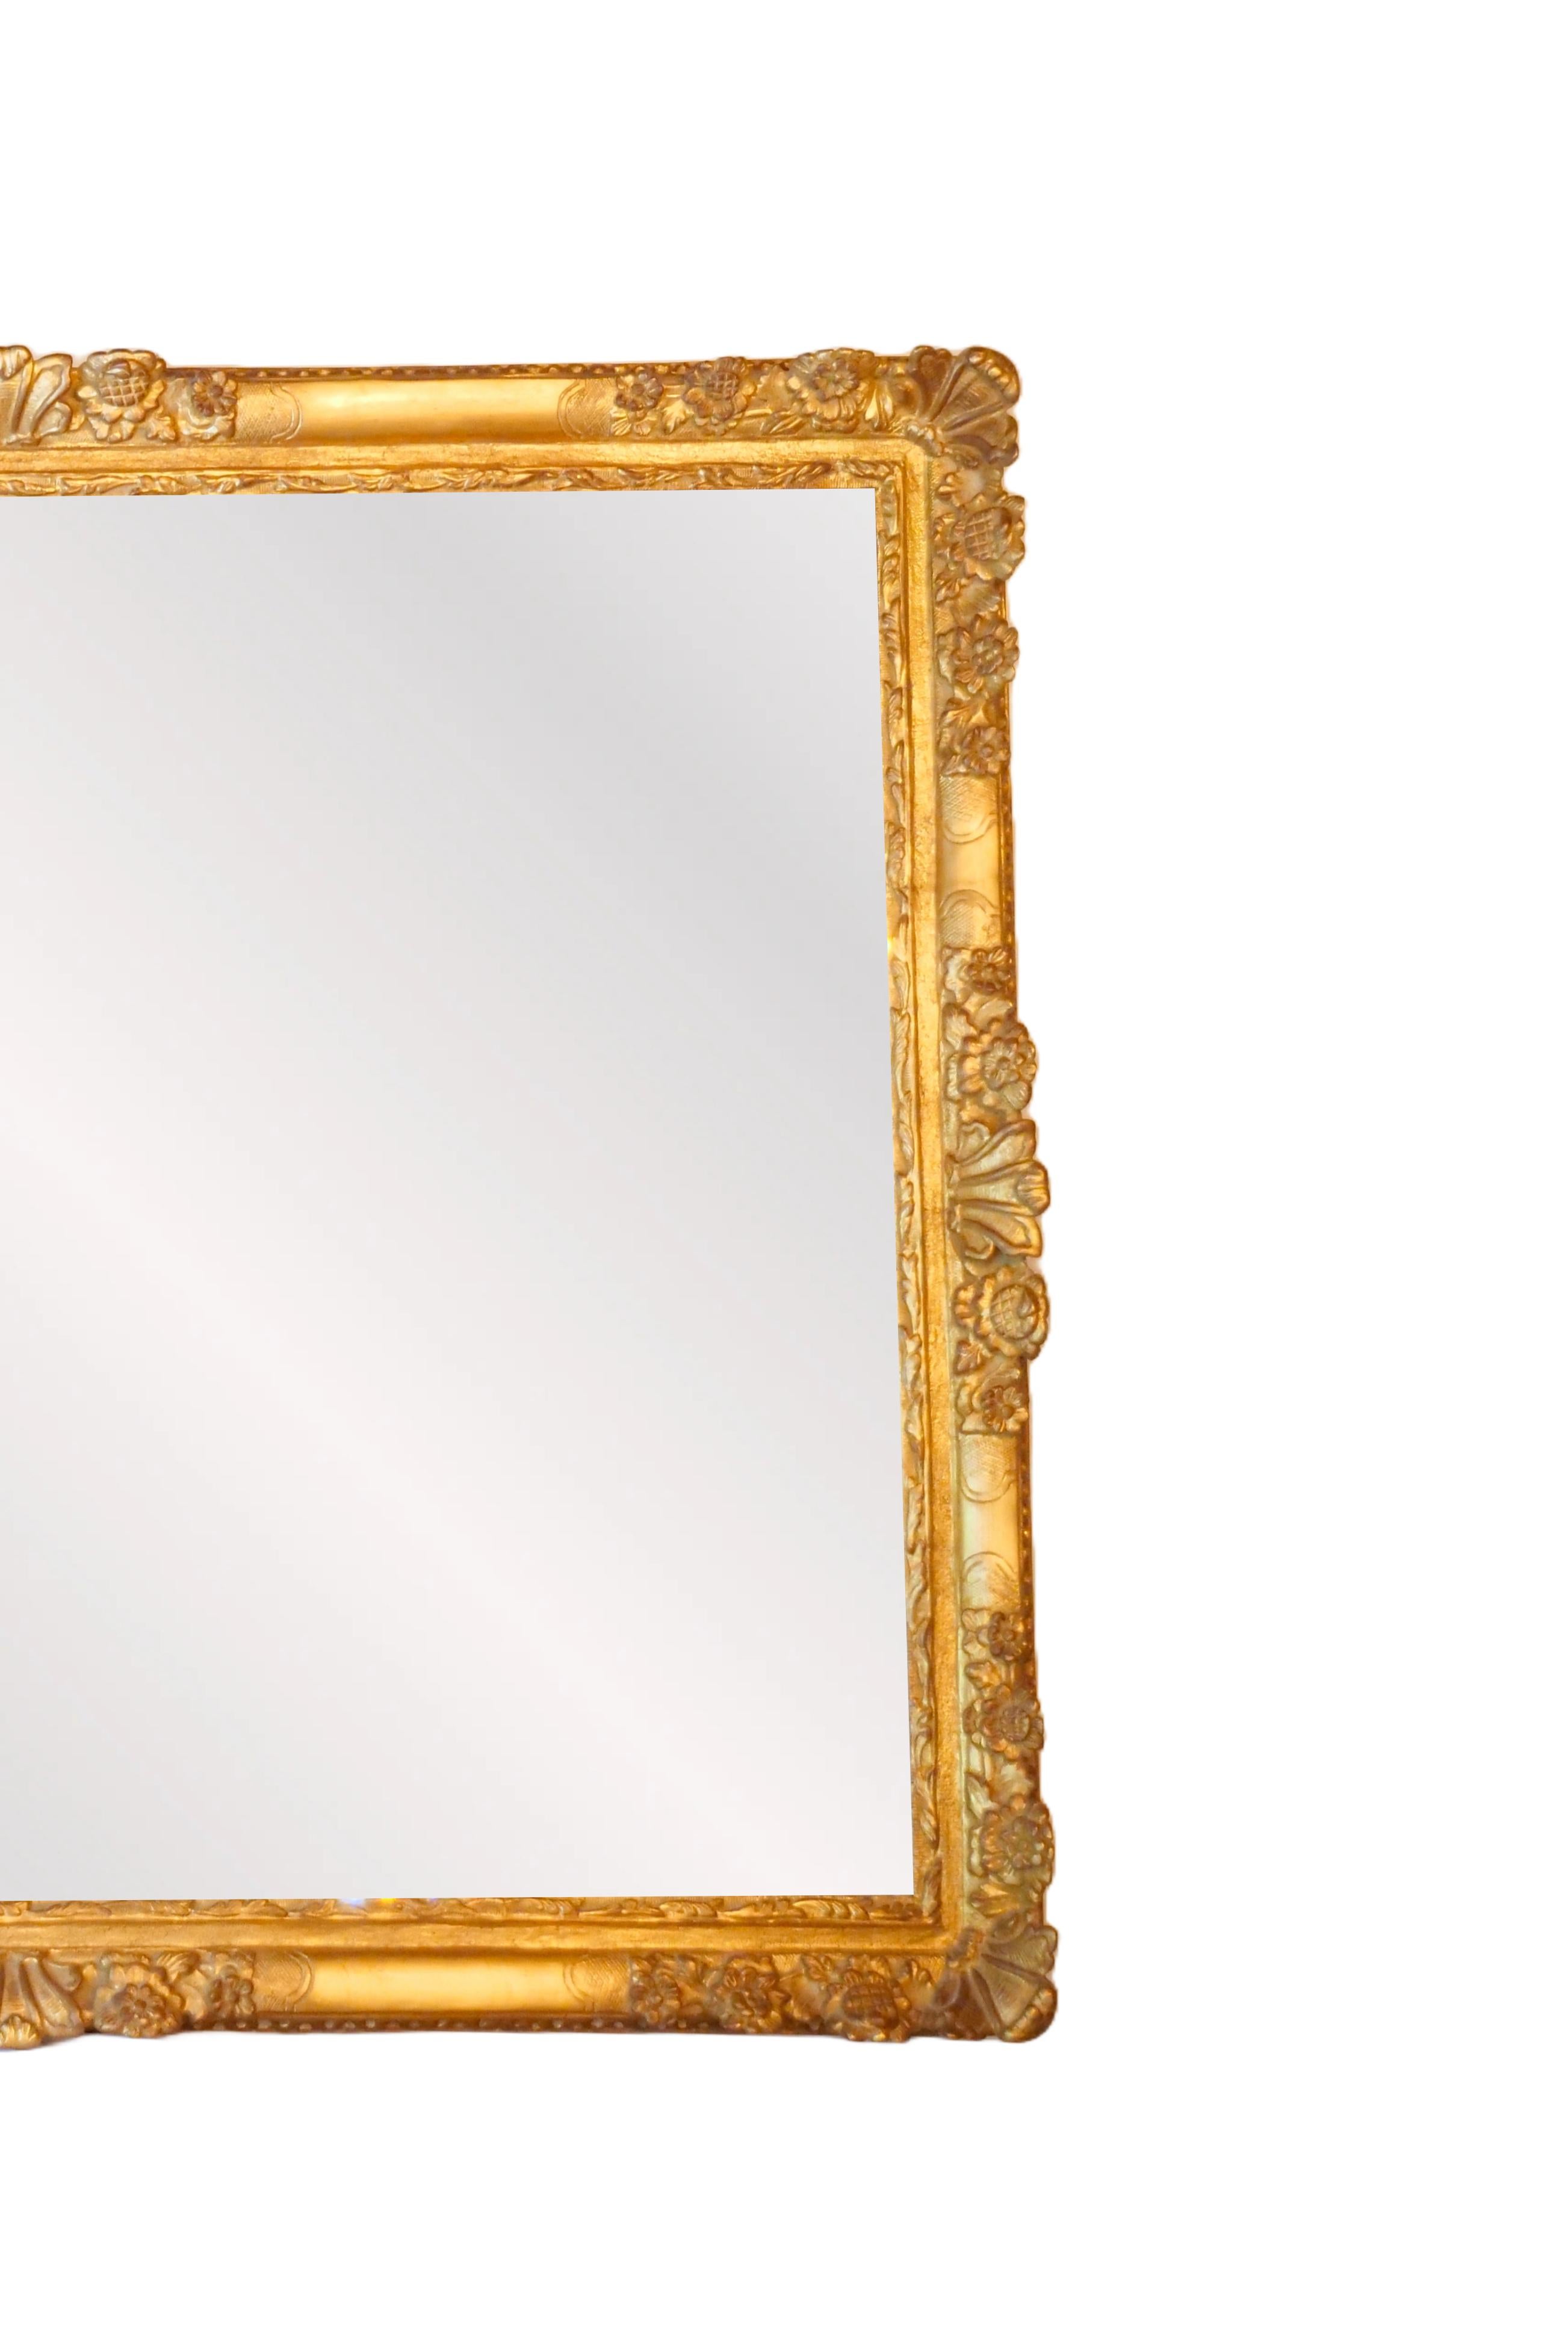 Exceptional French Giltwood Frame Rectangular Shape Hanging Wall Mirror In Good Condition For Sale In Tarry Town, NY